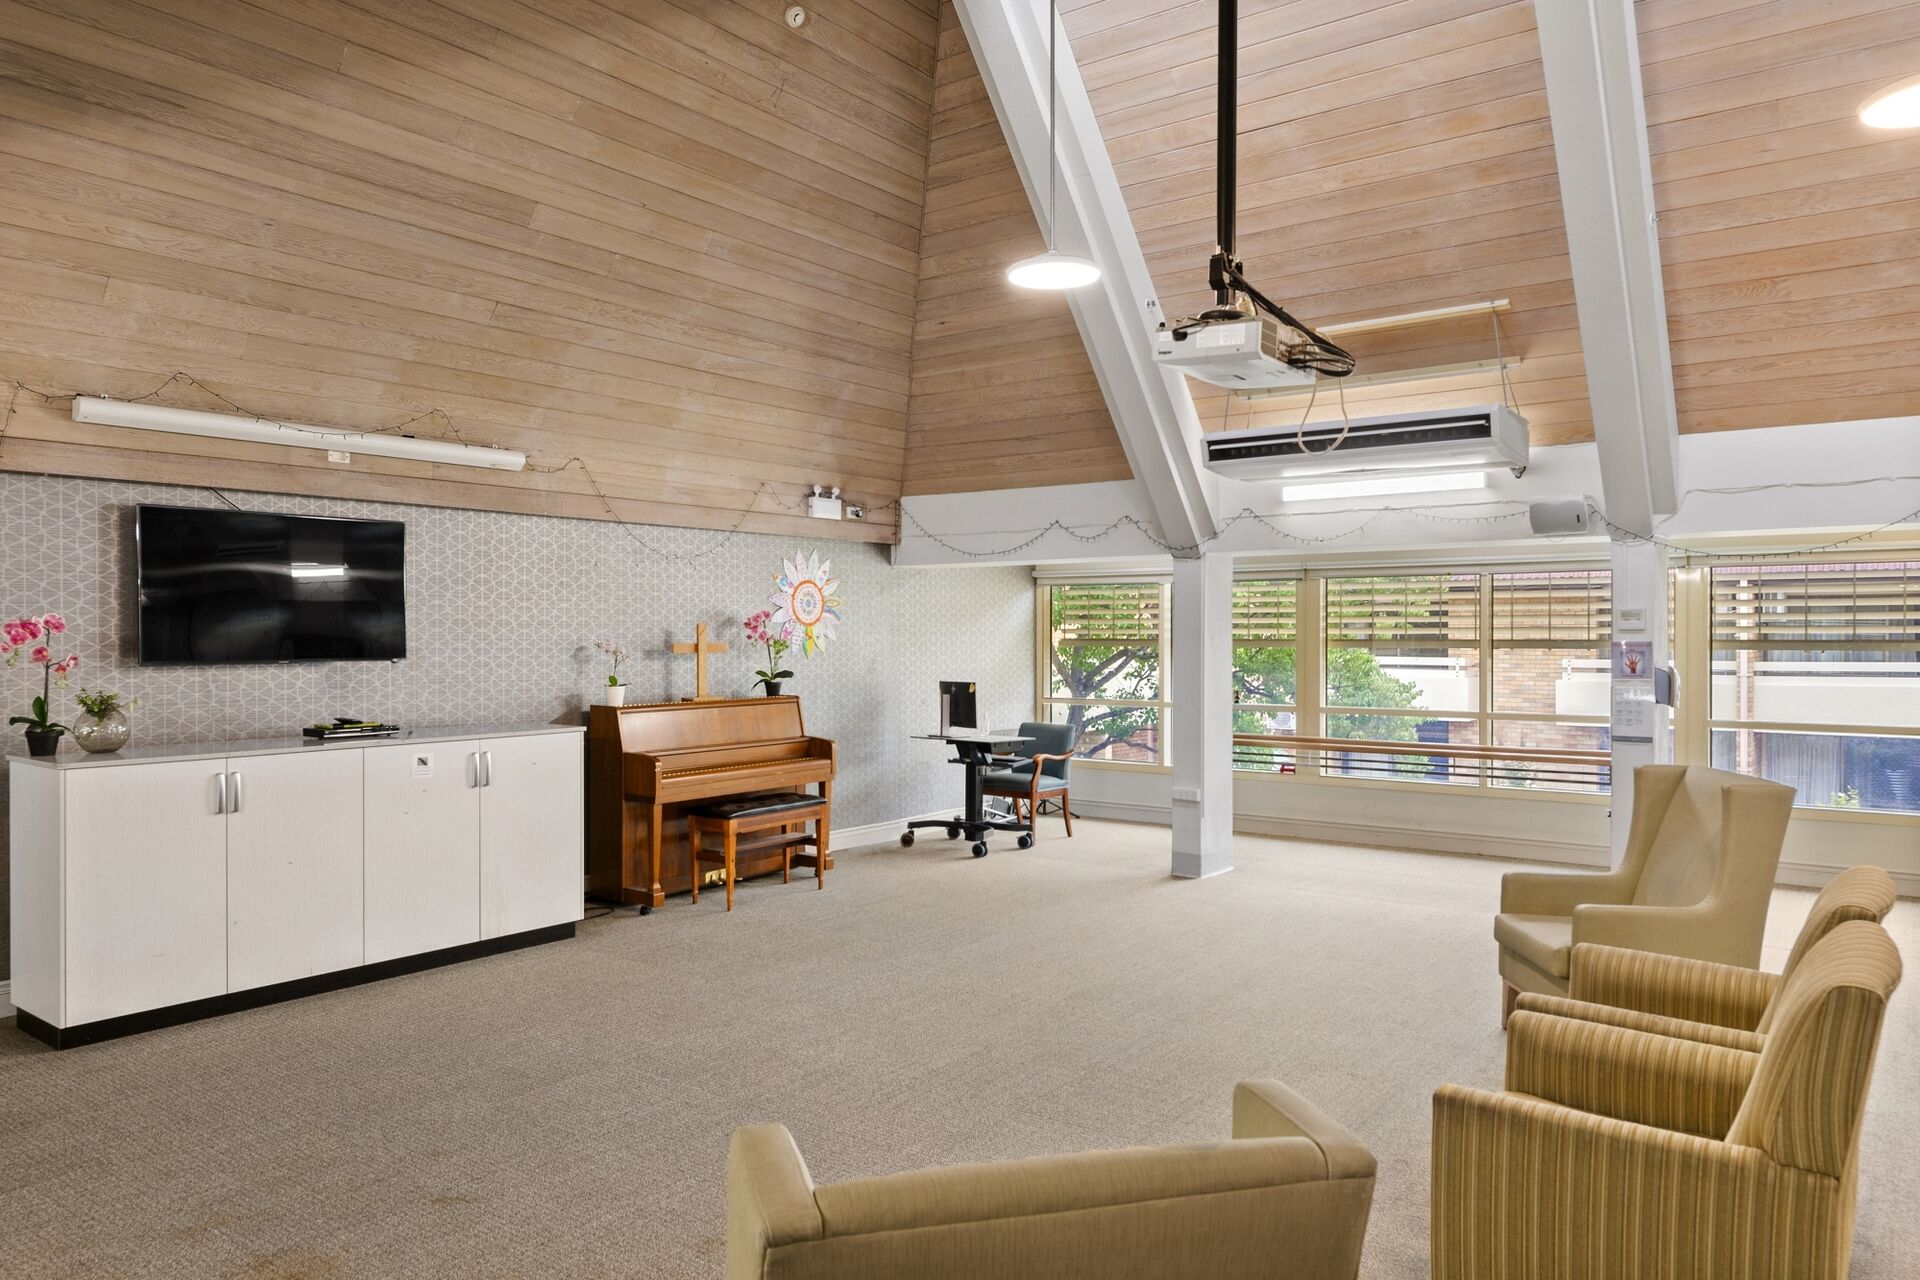 Chapel at aminya centre aged care home in baulkham hills for low care and dementia